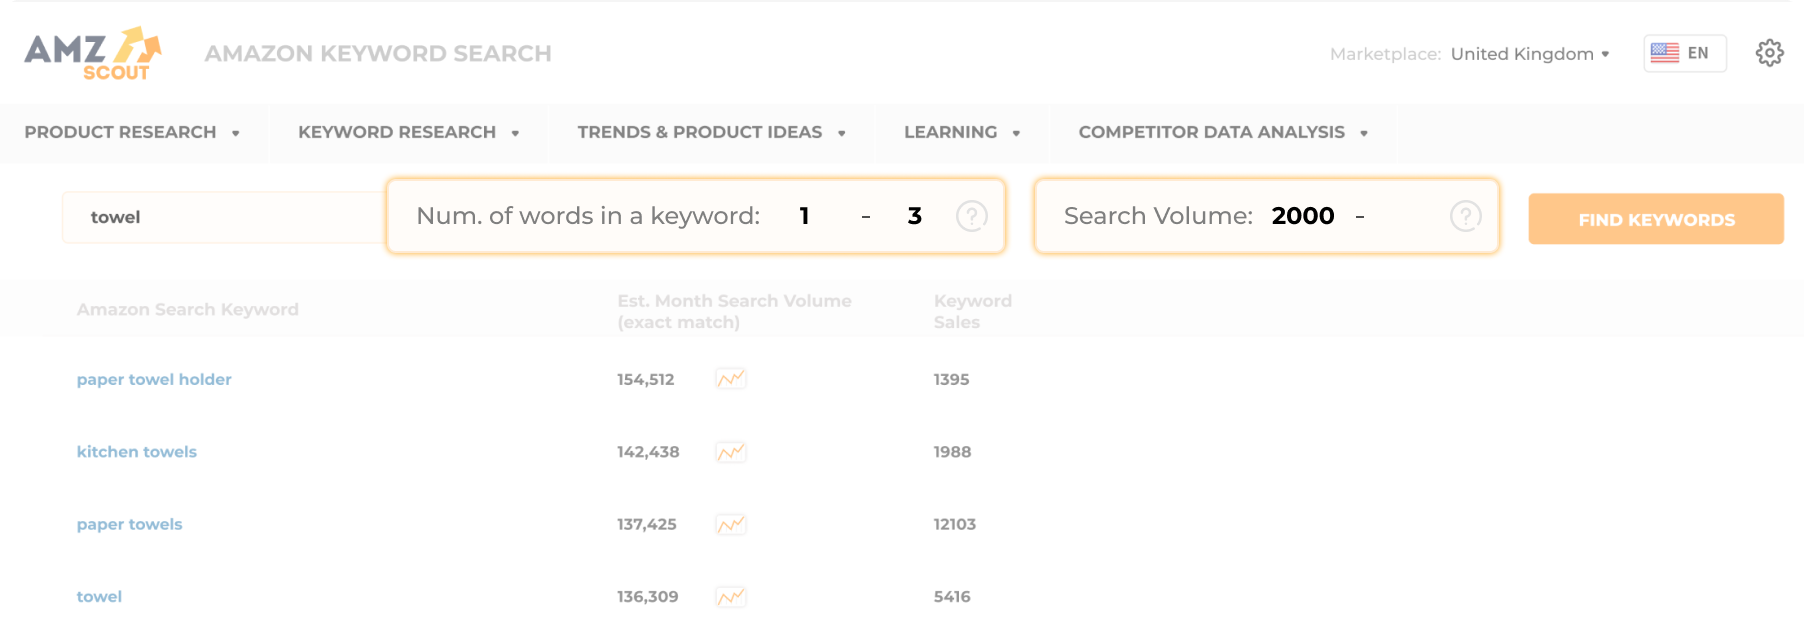 What are the Keyword Search Filters